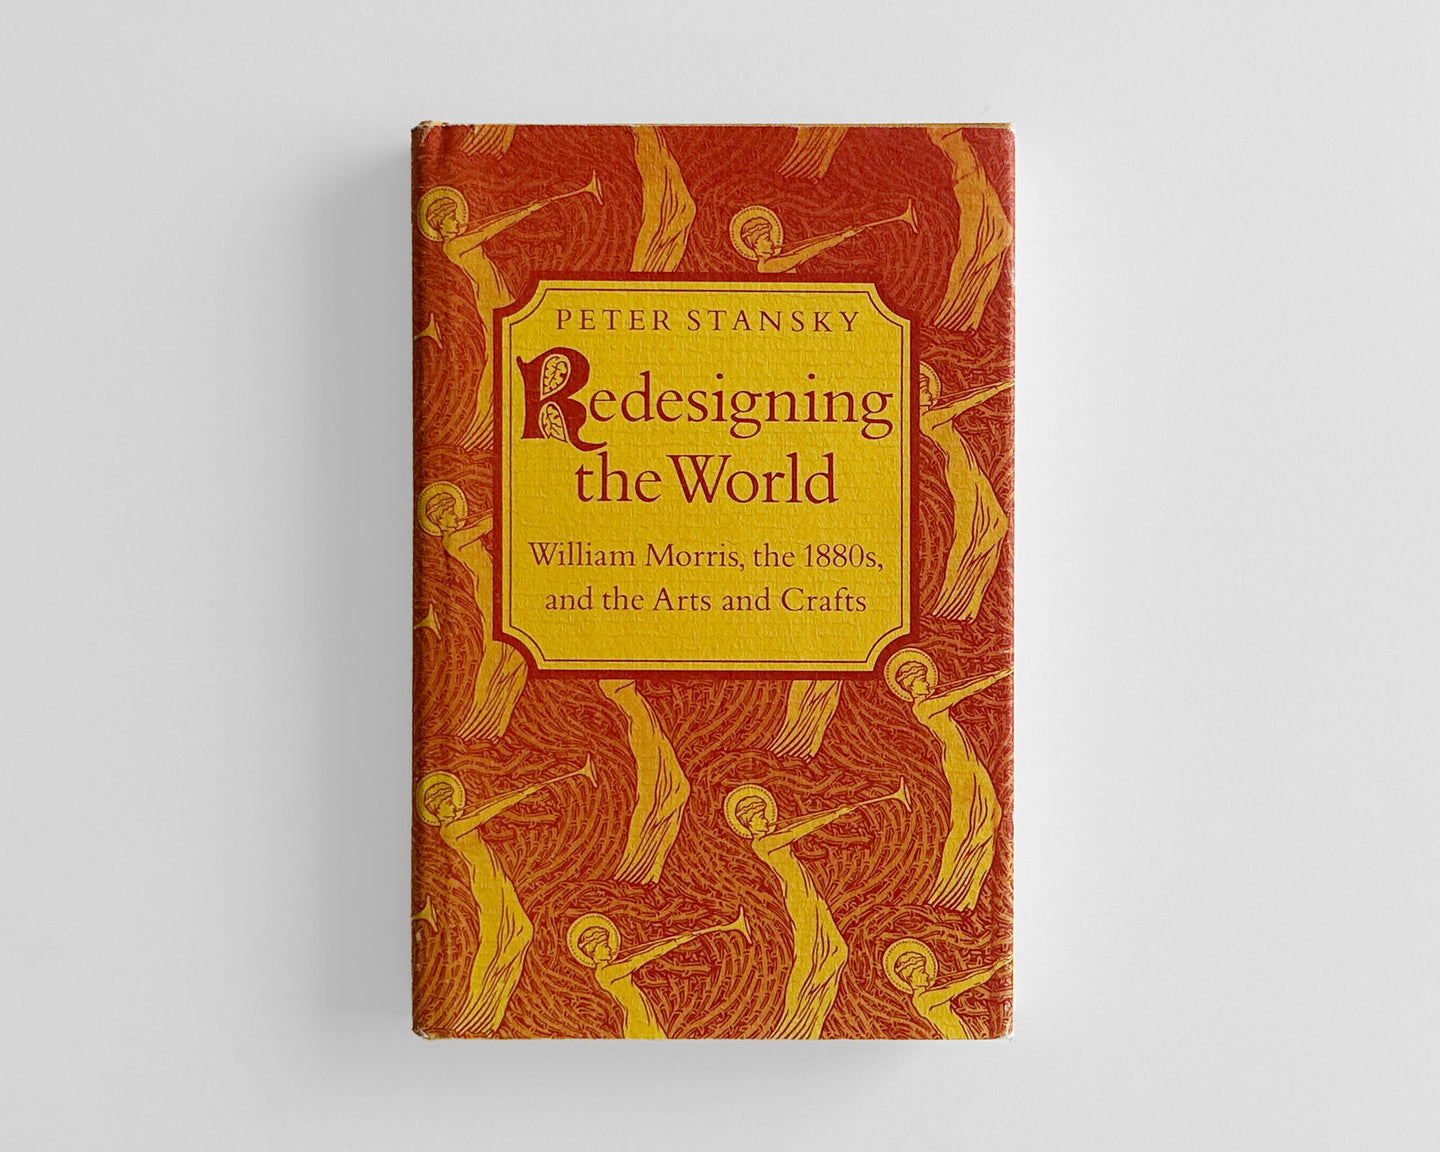 Redesigning the World: William Morris, the 1880s, and the Arts and Crafts [Peter Stansky]